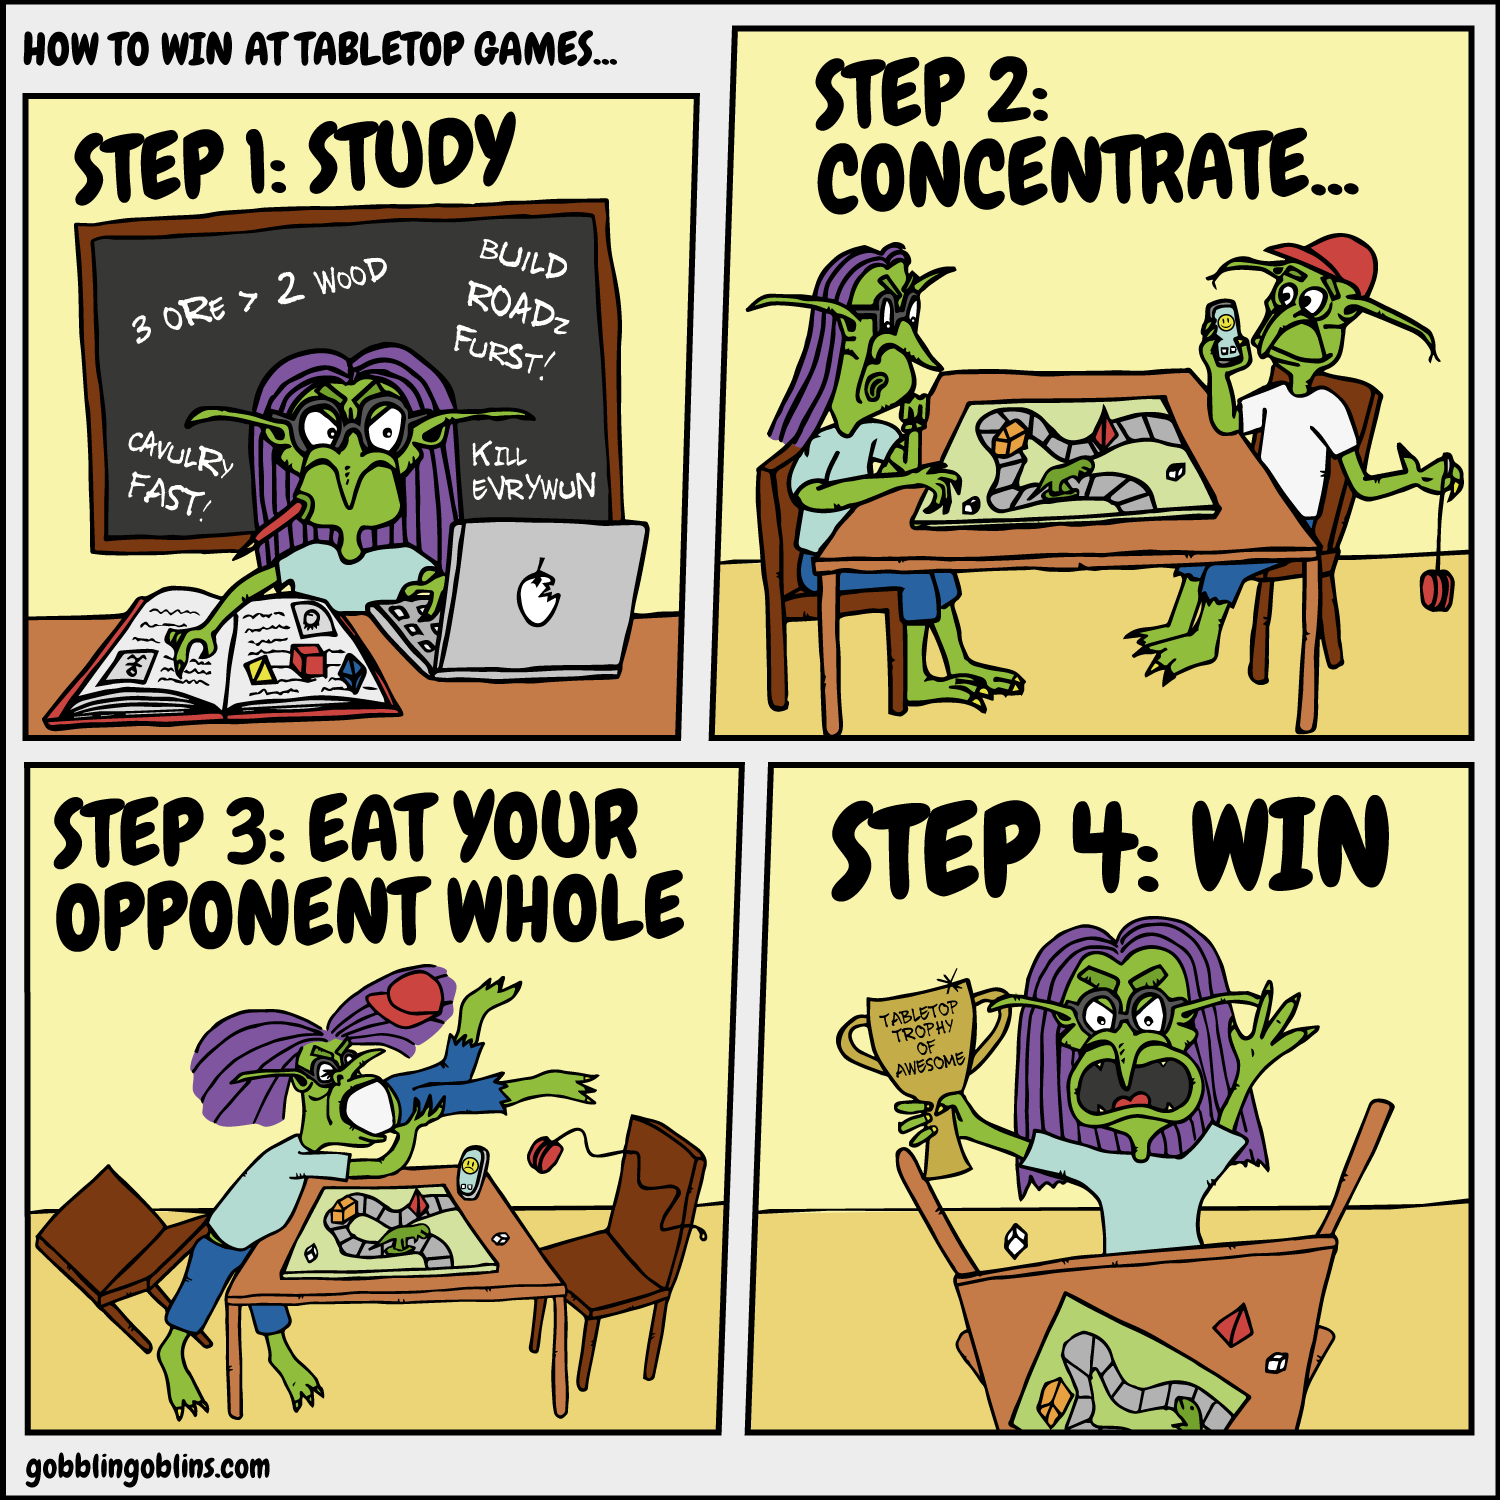 How To Win At Tabletop Games - a comic by Gobblin' Goblins